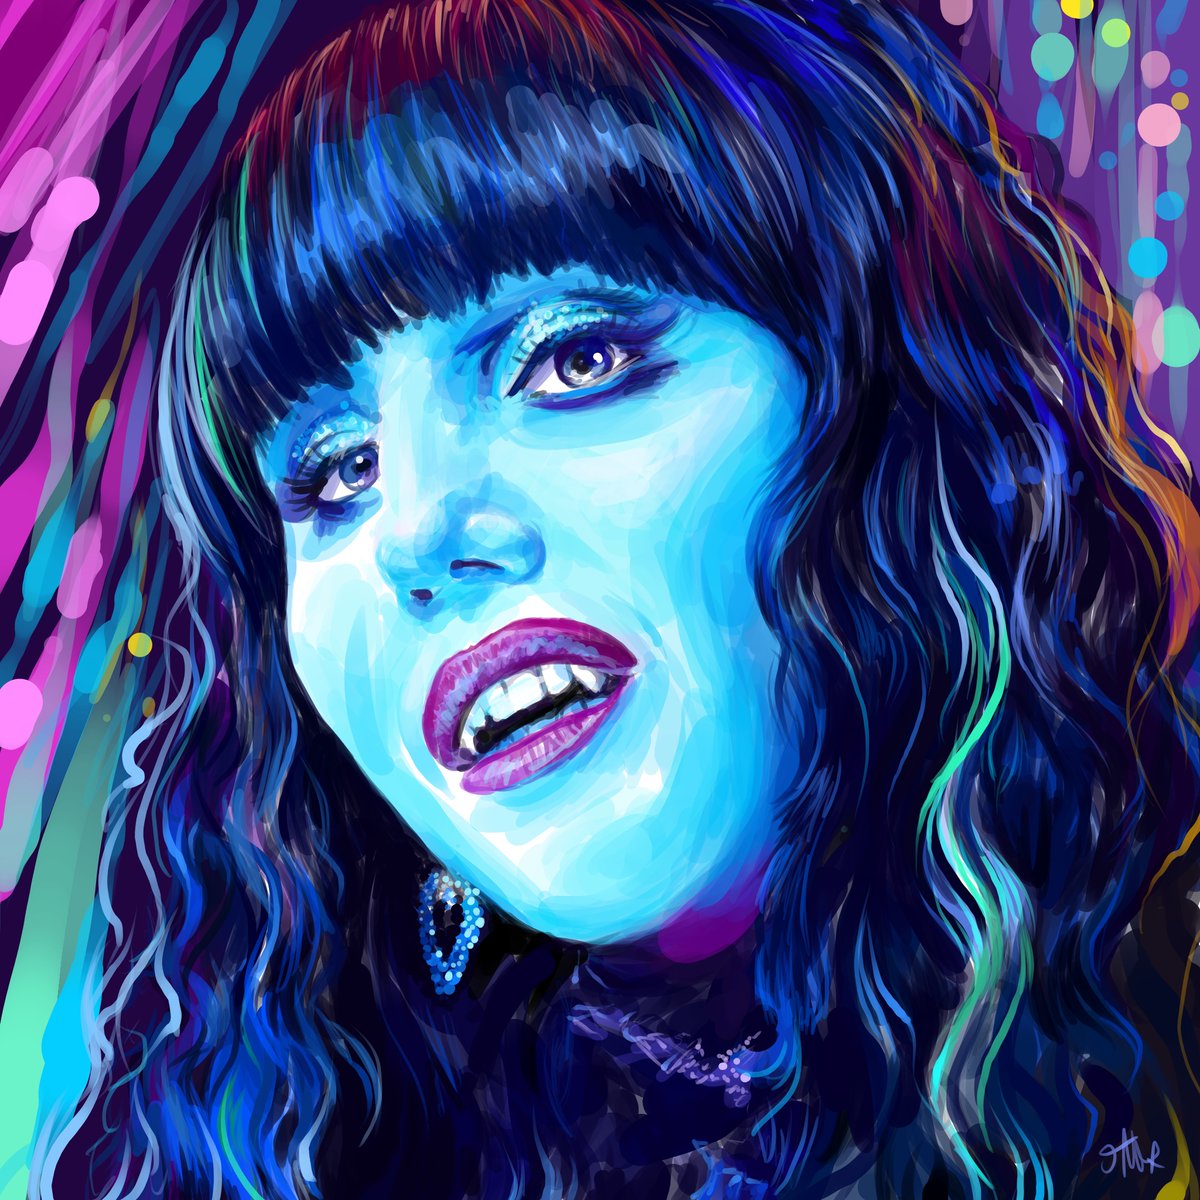 I did another WWDITS s4 photo shoot redraw to bring some colour to a grim week and chose the lovely if utterly batshit Nadja for this piece 😄💜patreon.com/xxmisty 💜 ko-fi.com/xxmisty 💜 #wwdits #WhatWeDointheShadows #nadja #wwditsnadja #NatasiaDemetriou